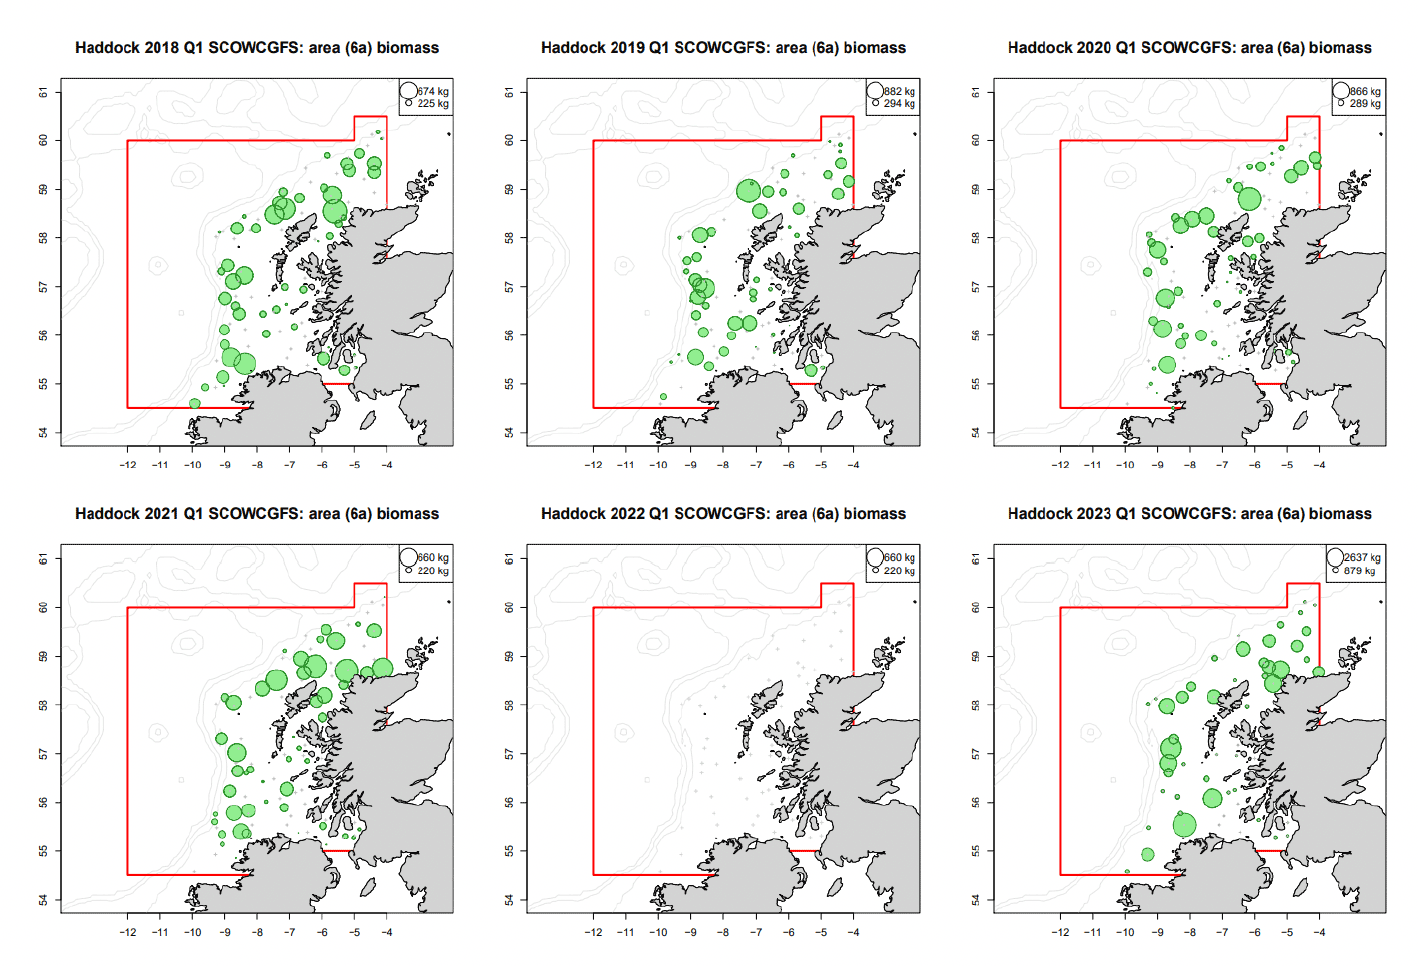 Distribution map for survey haddock biomass in Quarter 1 in the West of Scotland (area 6a). There are 6 bubble plots one per year (2018-2023). The plots indicate biomass bubbles more or less evenly distributed throughout area 6a. There are no bubbles in 2022 when the survey was cancelled.